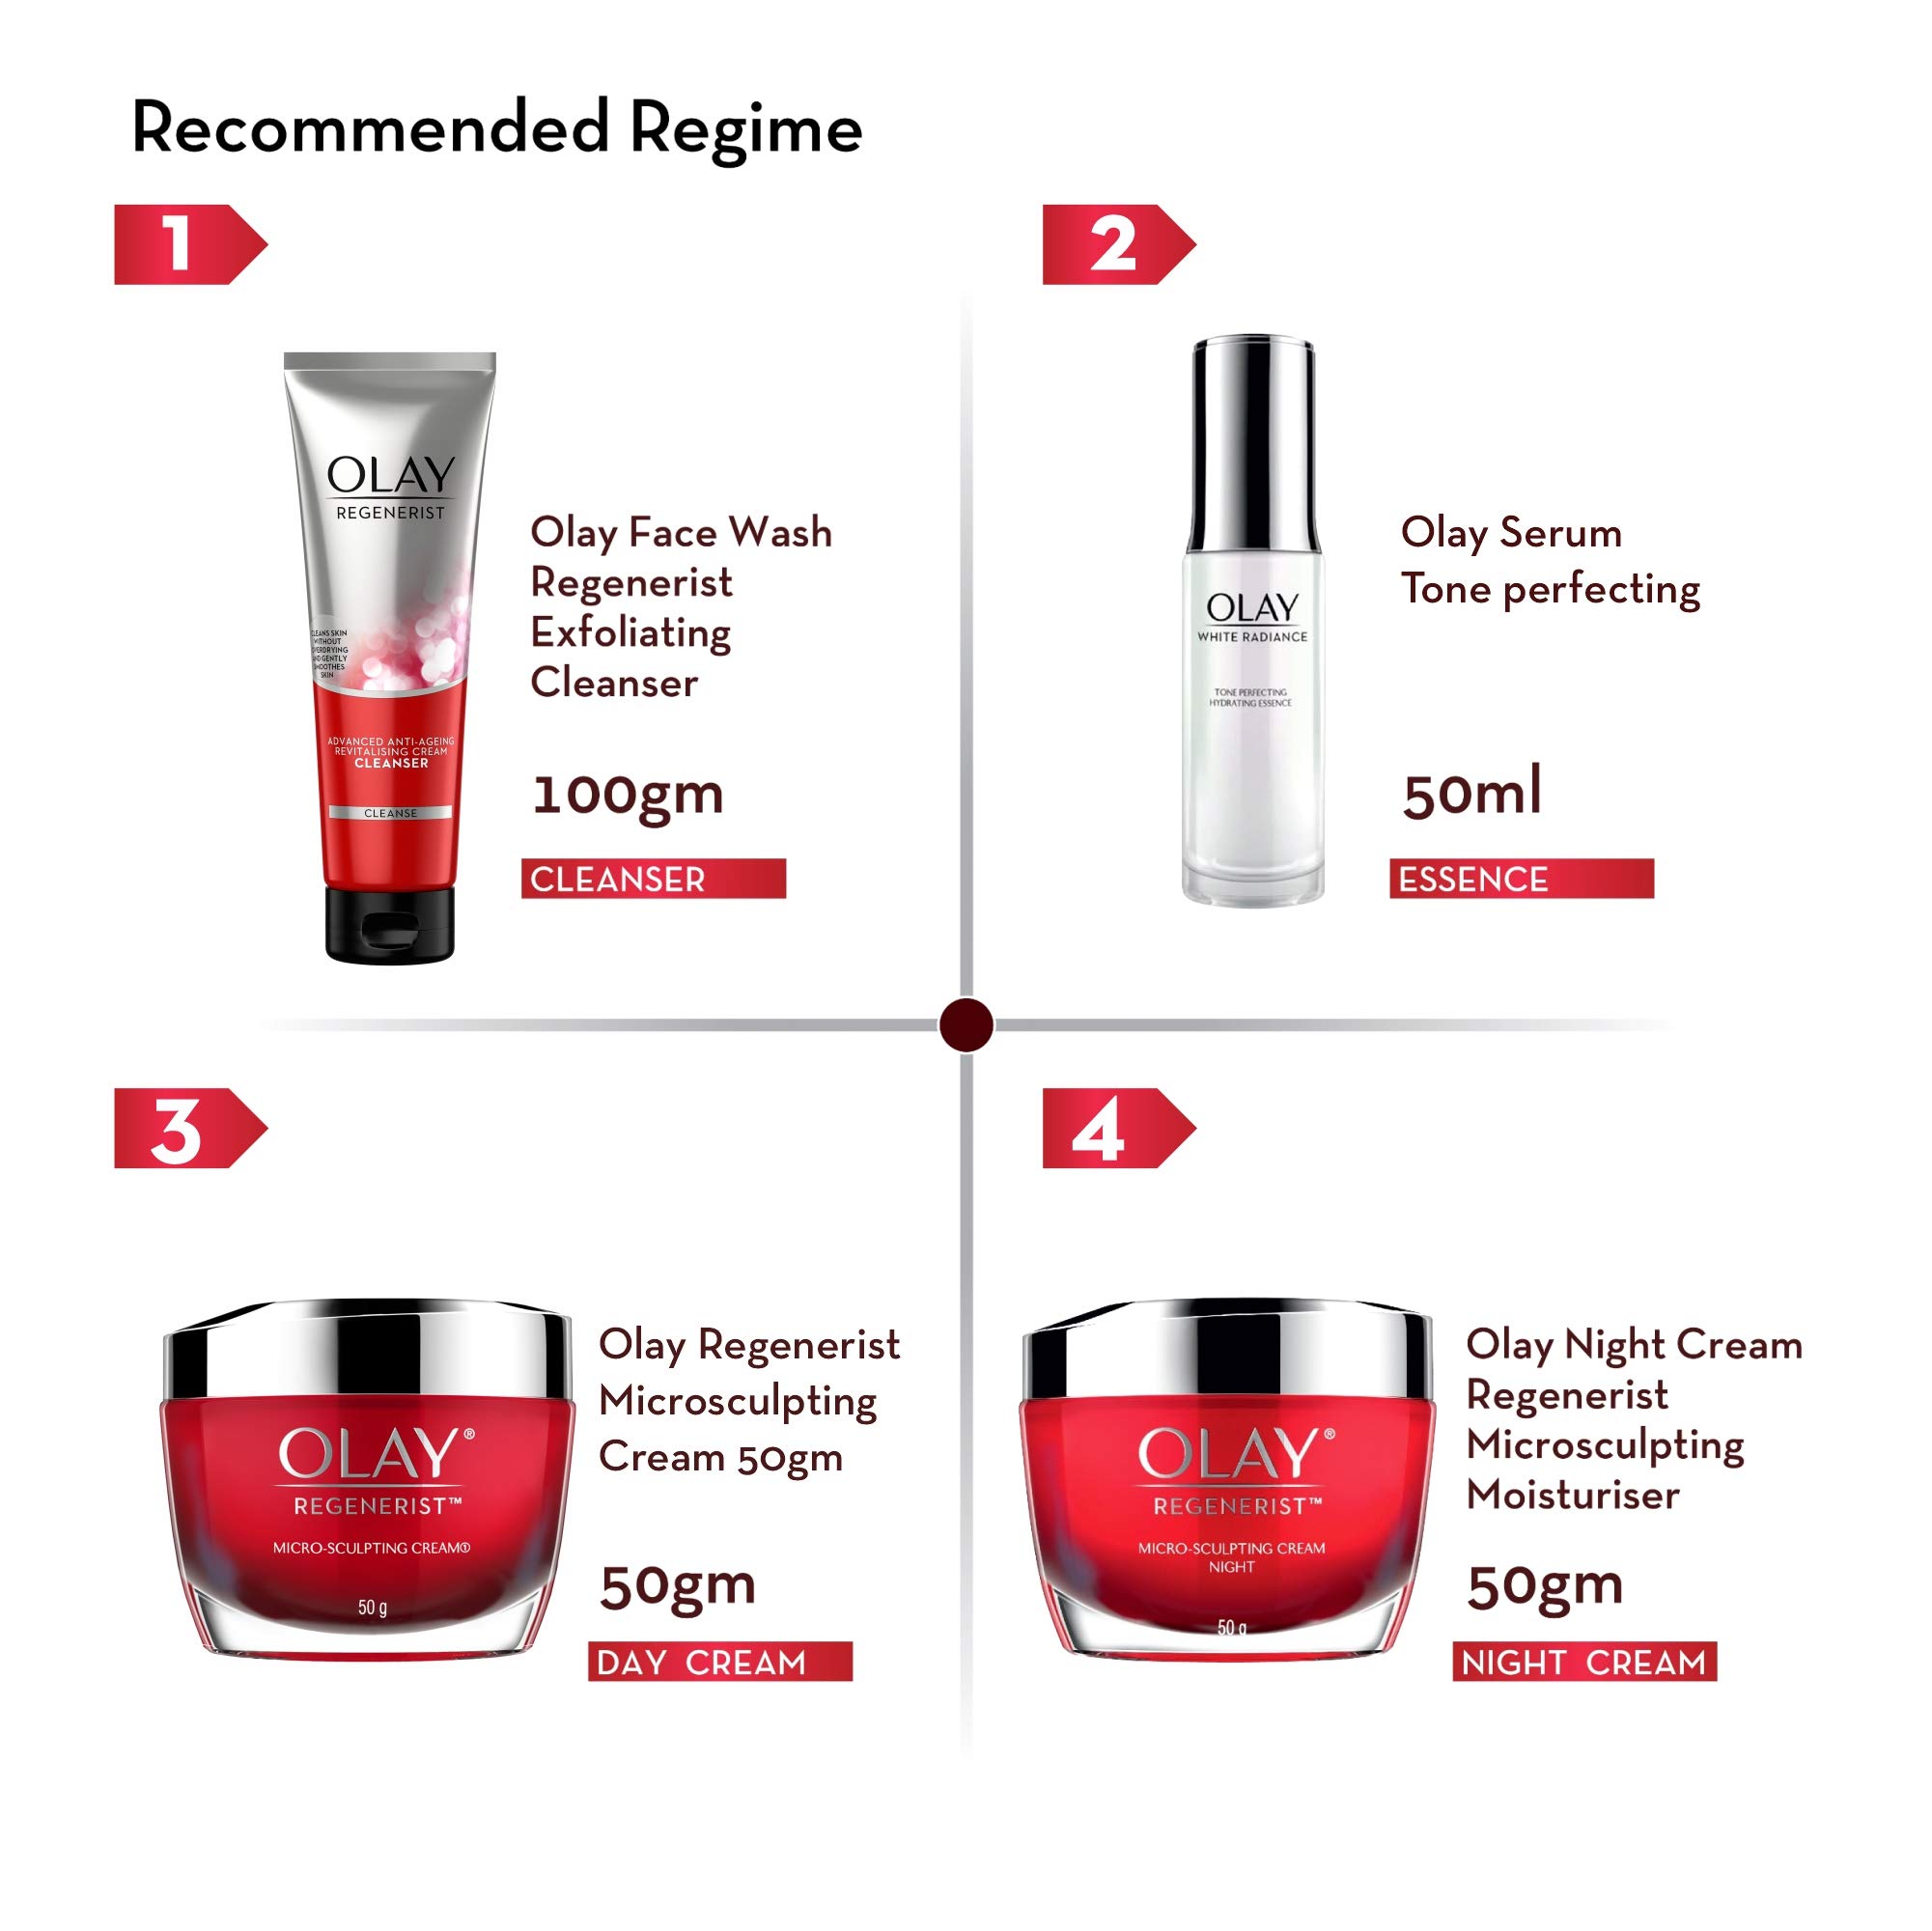 Olay Regenerist Microsculpting Day Cream in two items